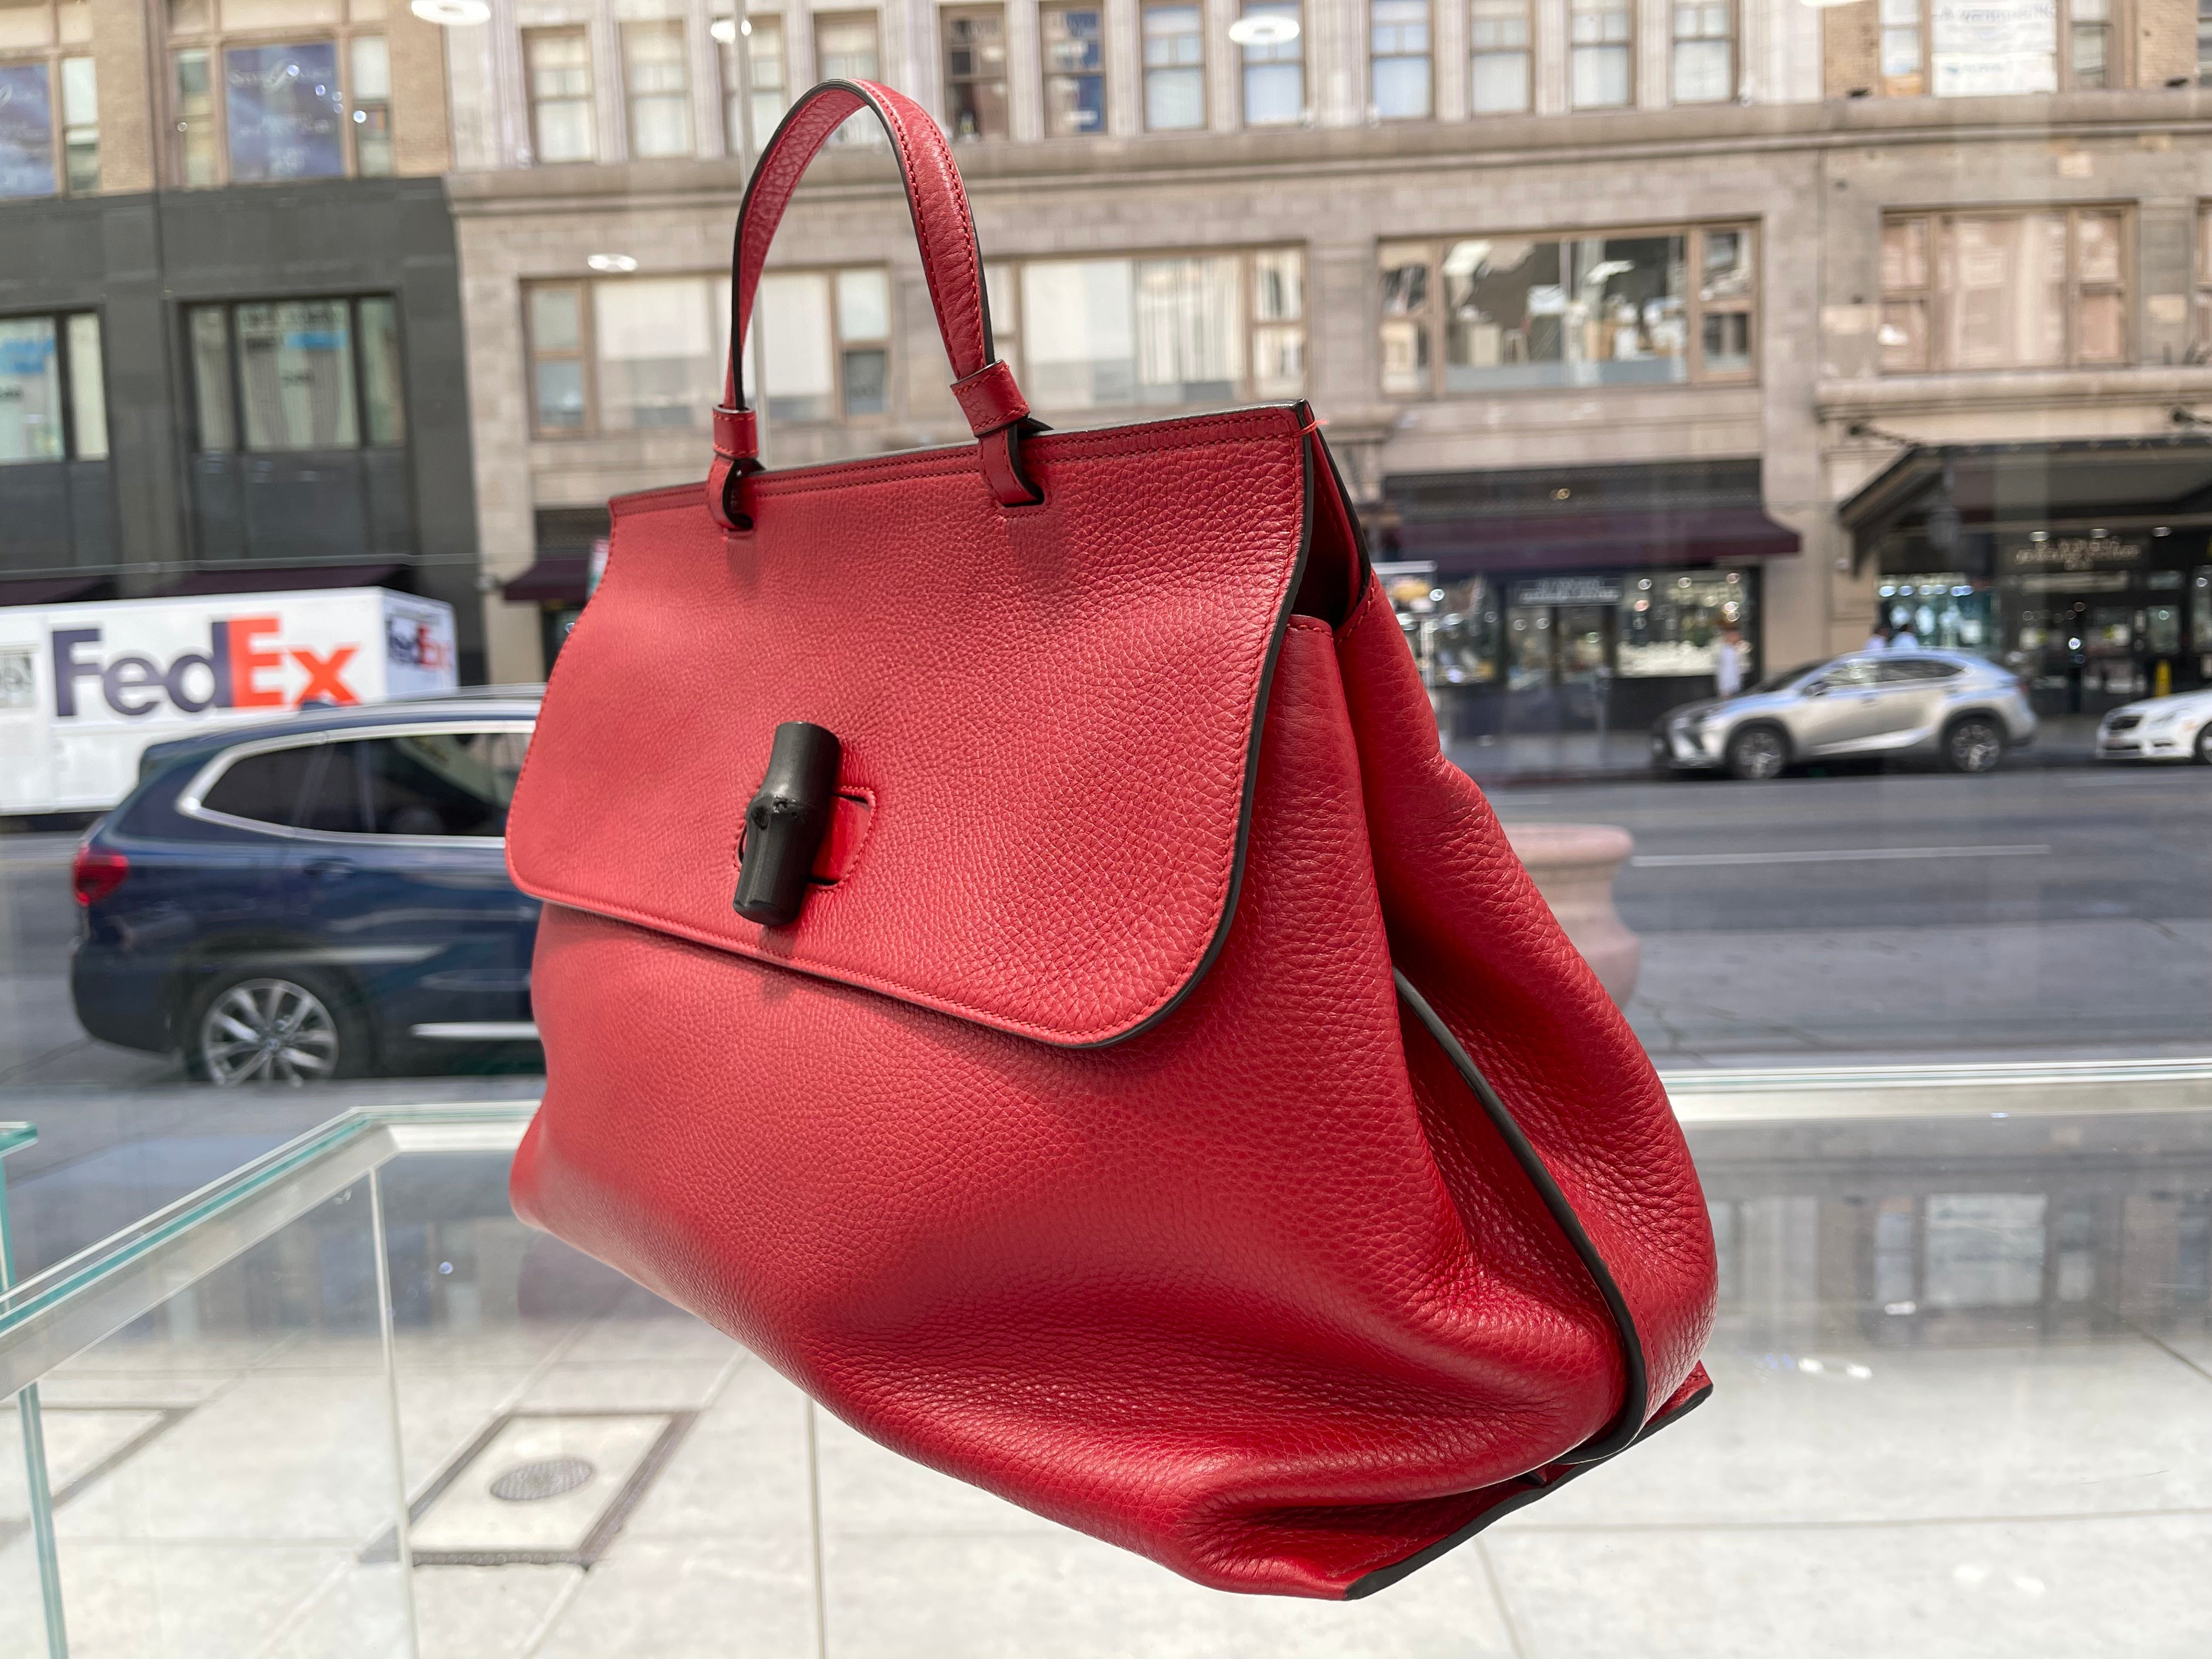 Red Gucci Bamboo Daily Satchel